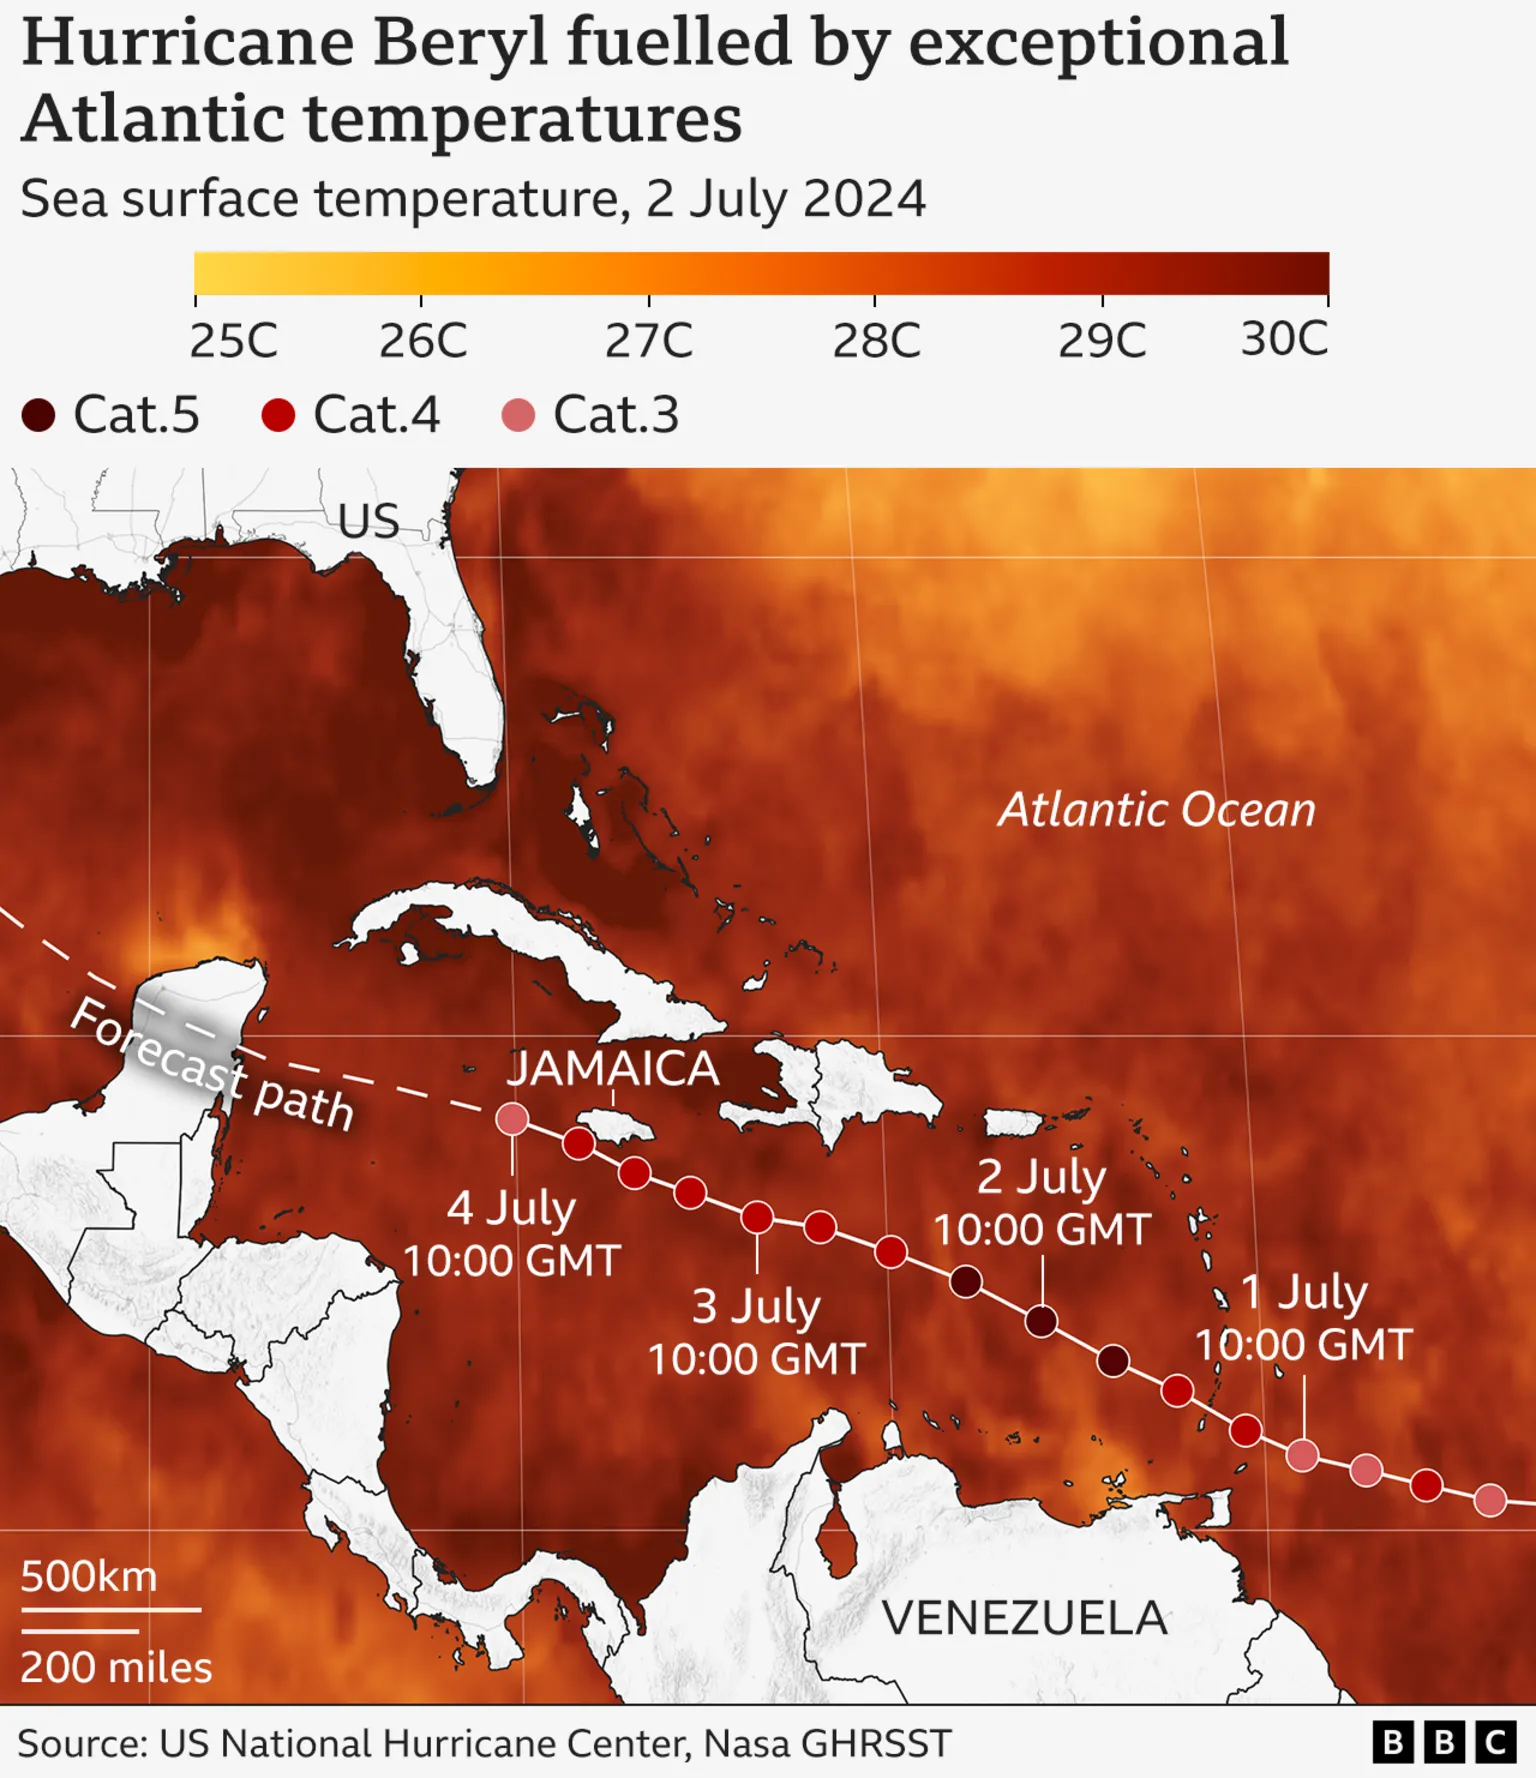 Map showing sea surface temperatures in the Caribbean Sea and Atlantic Ocean on 2 July 2024. The track and intensity of Hurricane Beryl is indicated. Data: U.S. National Hurricane Center / NASA. Graphic: BBC